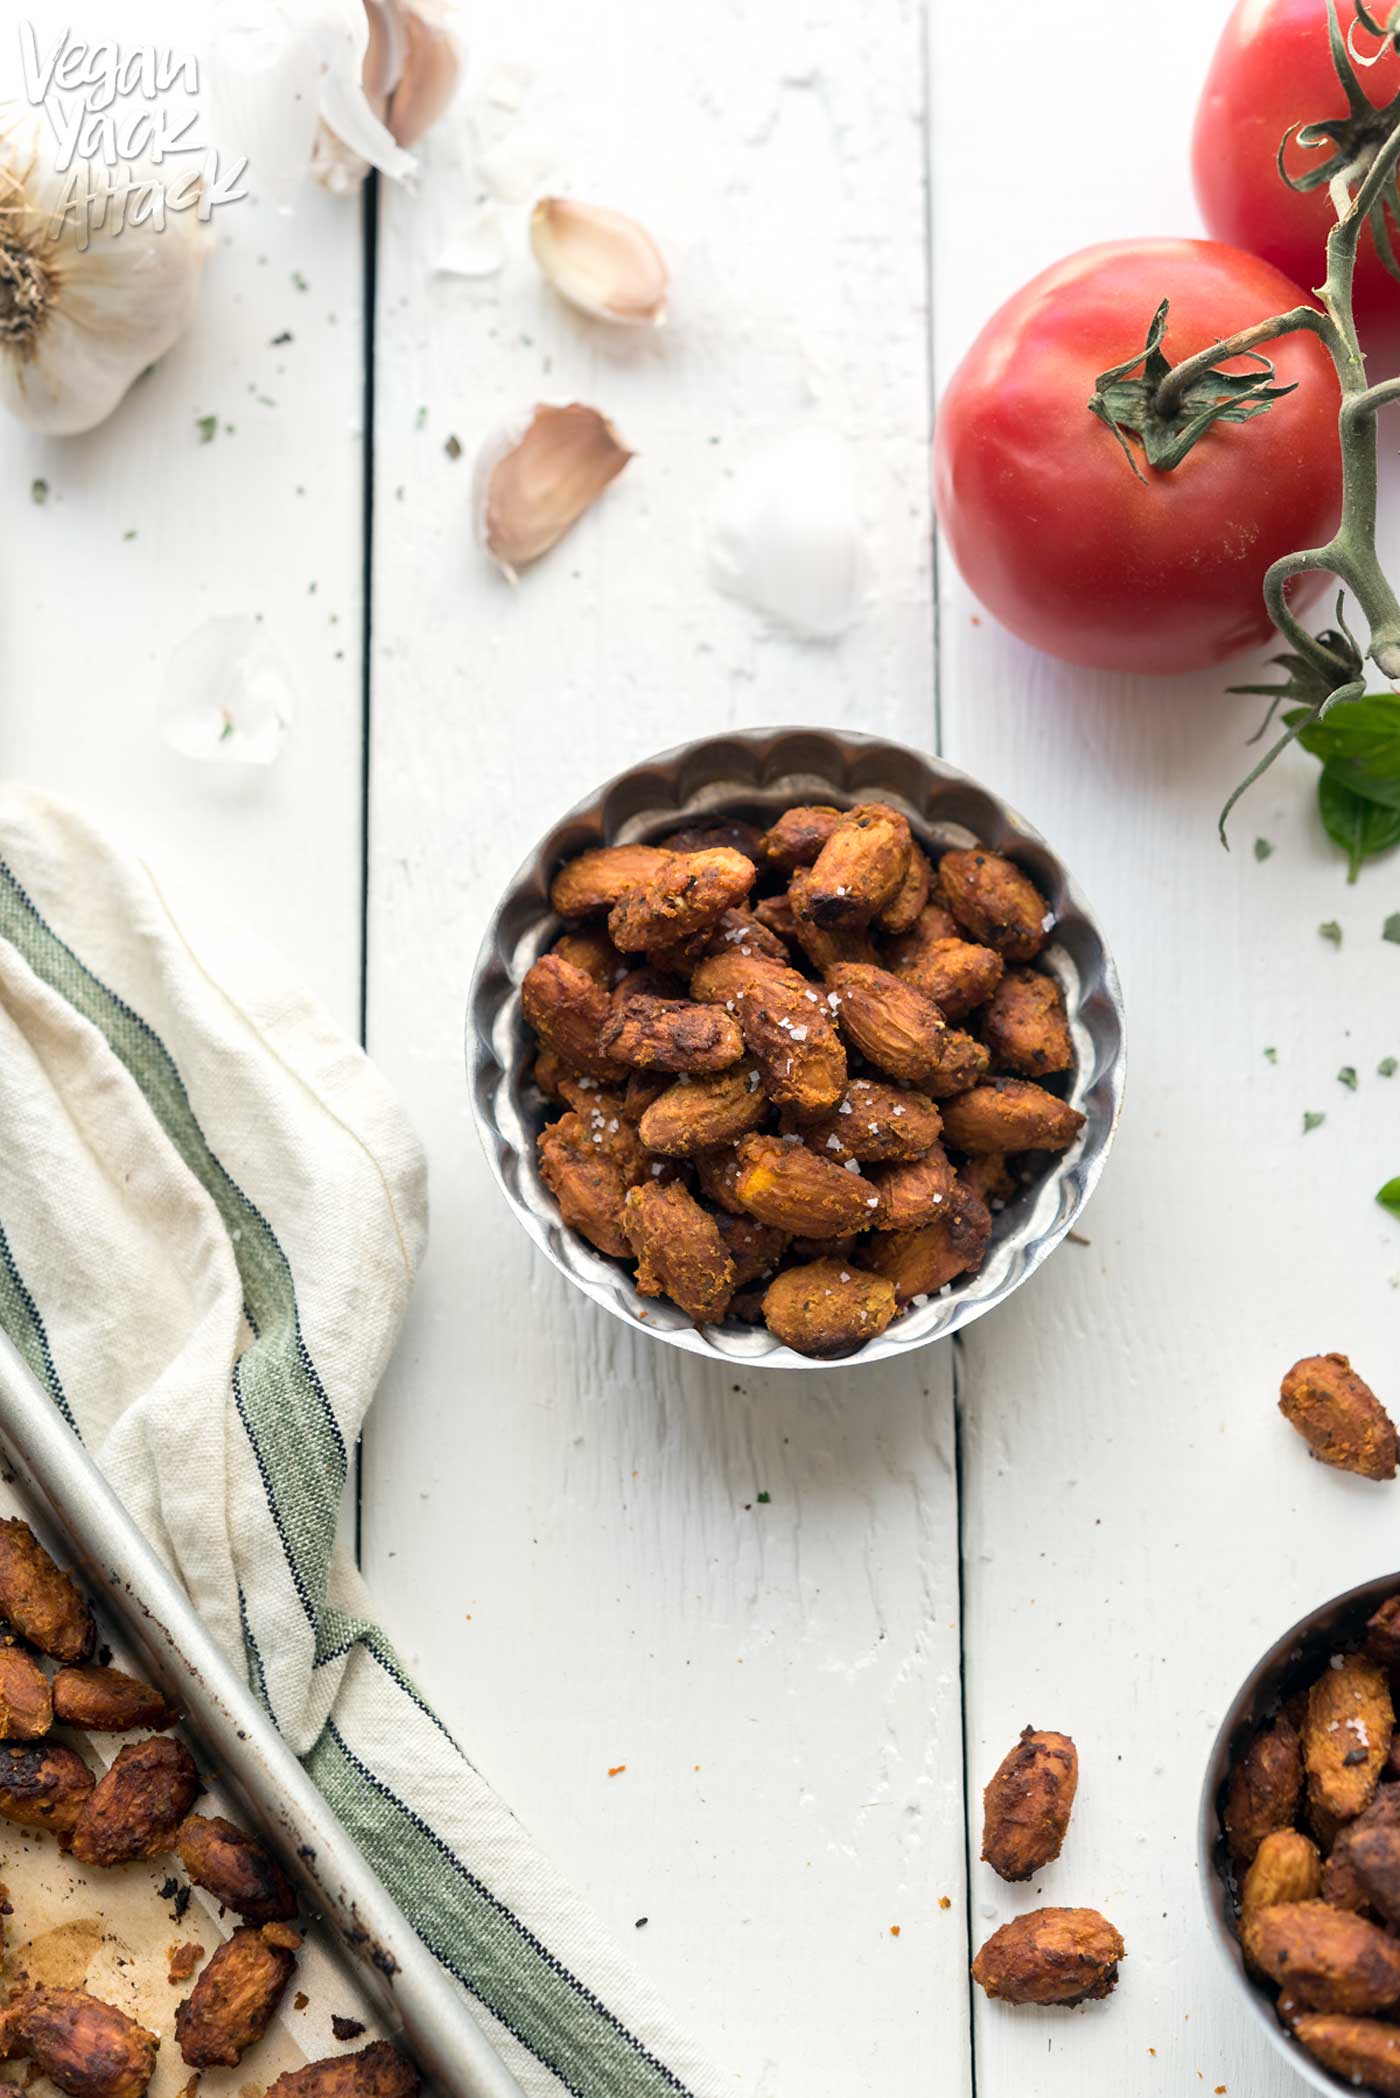 Pizza-Roasted Almonds! Has 8 ingredients, is easy-to-make, and an absolutely delicious, healthy snack! Vegan, Gluten-free, Soy-free #veganyackattack